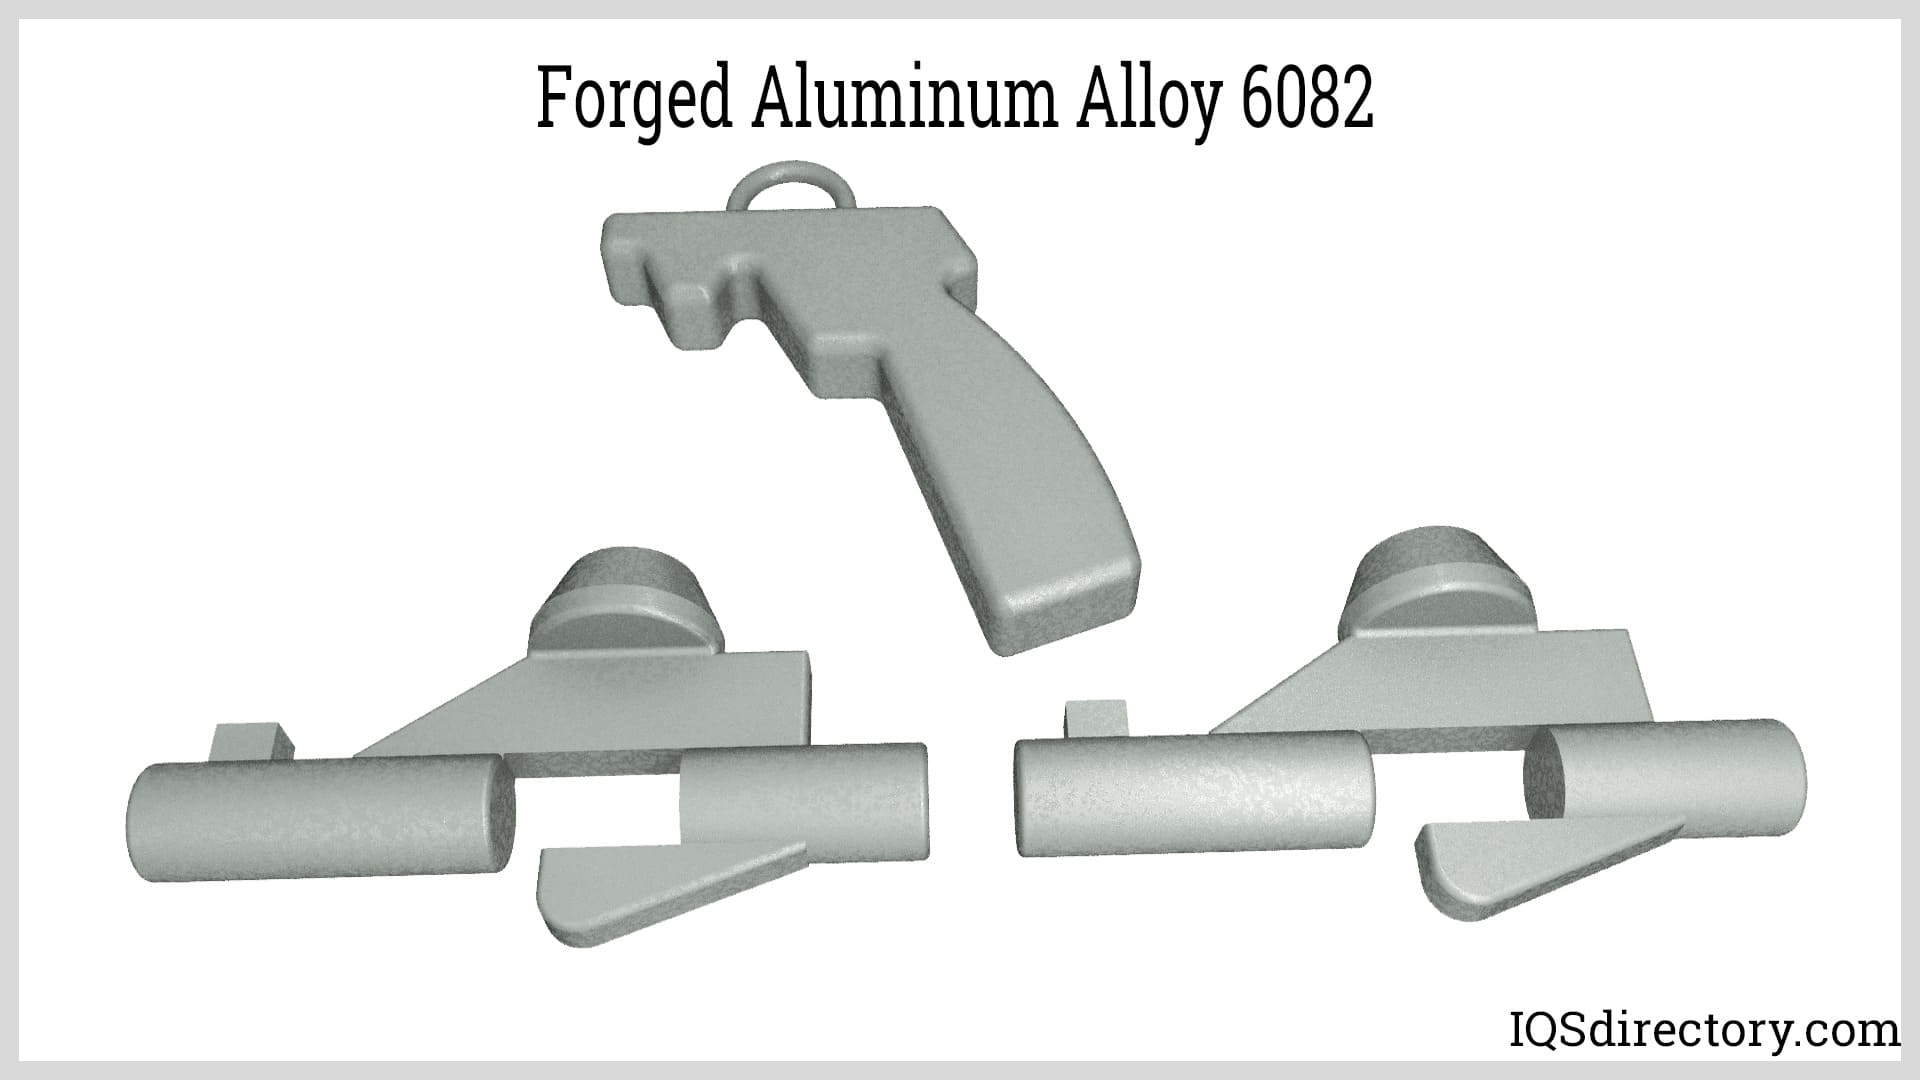 Forged Aluminum Alloy 6082